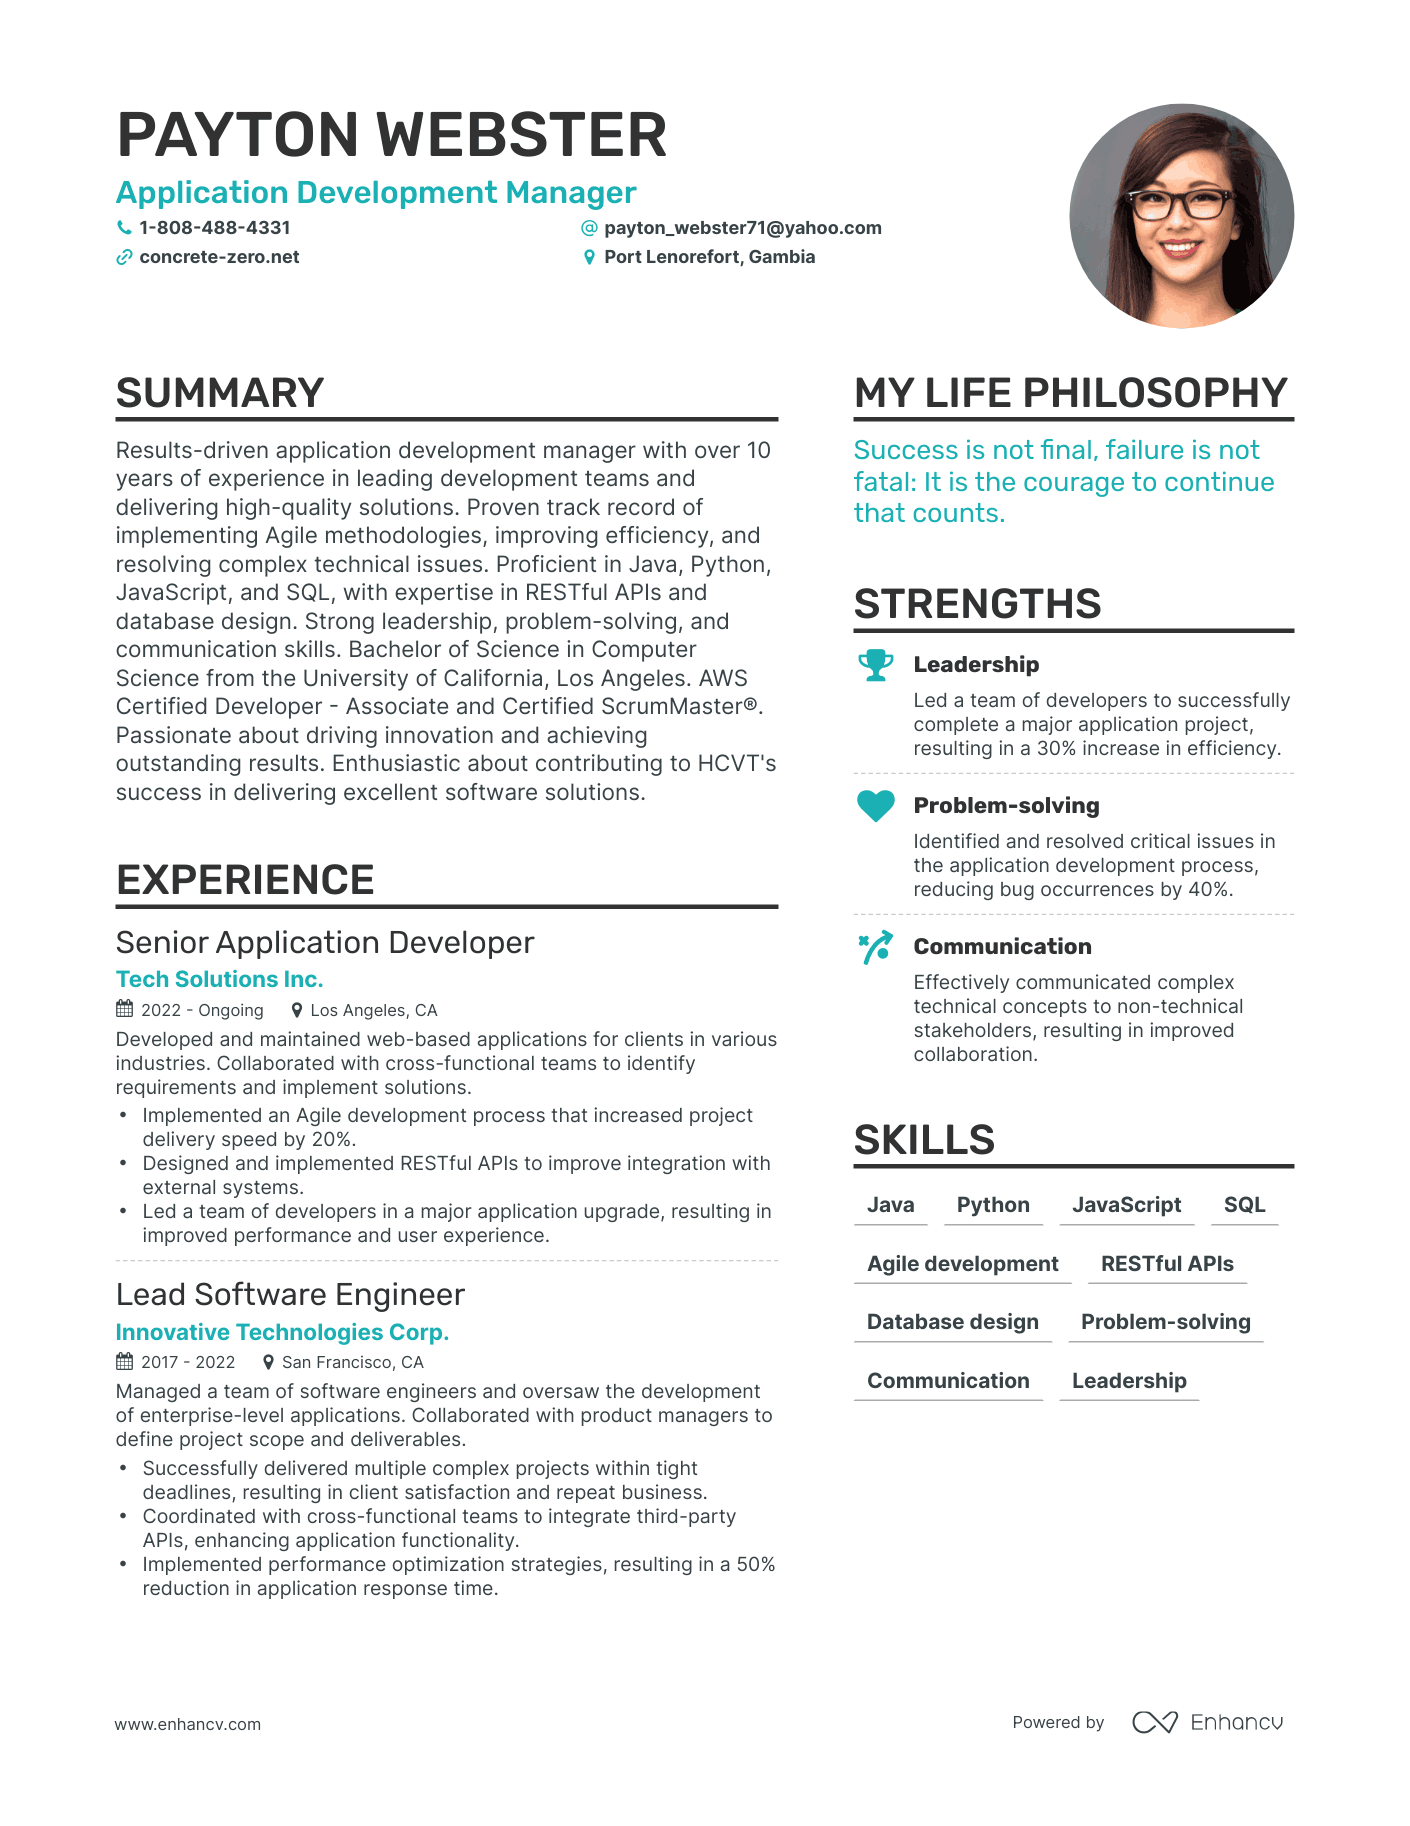 Application Development Manager resume example